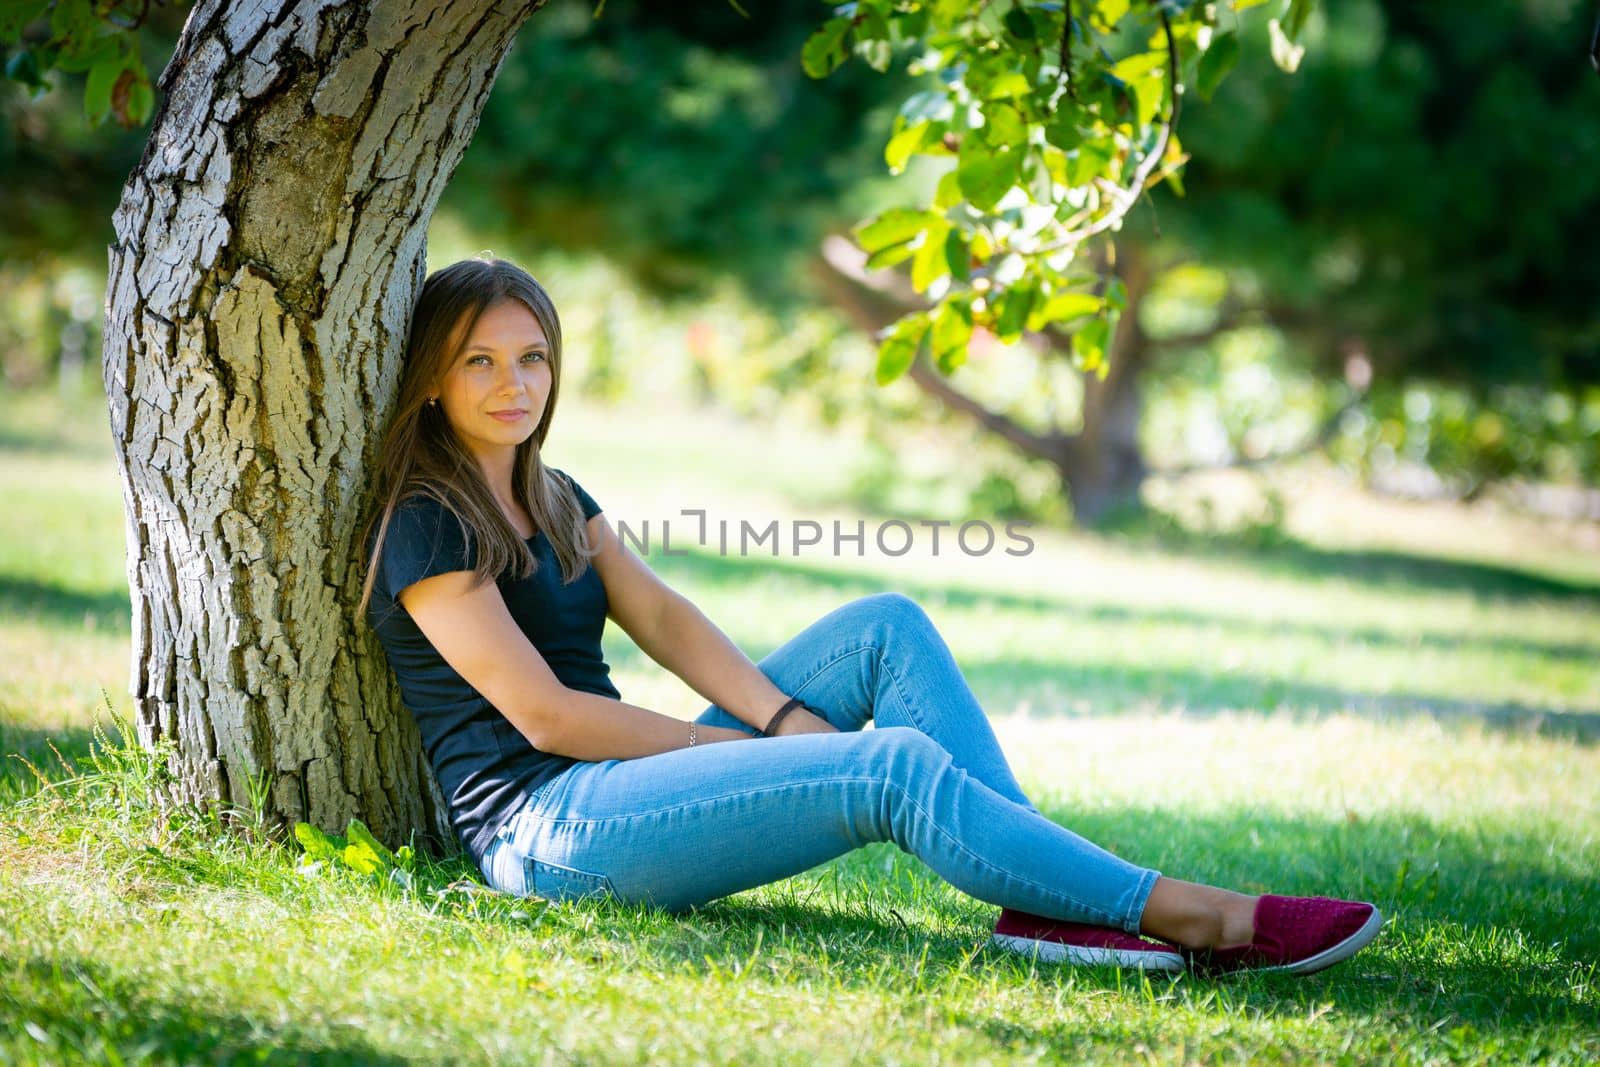 A girl sits under a tree in a sunny park and looks into the frame a